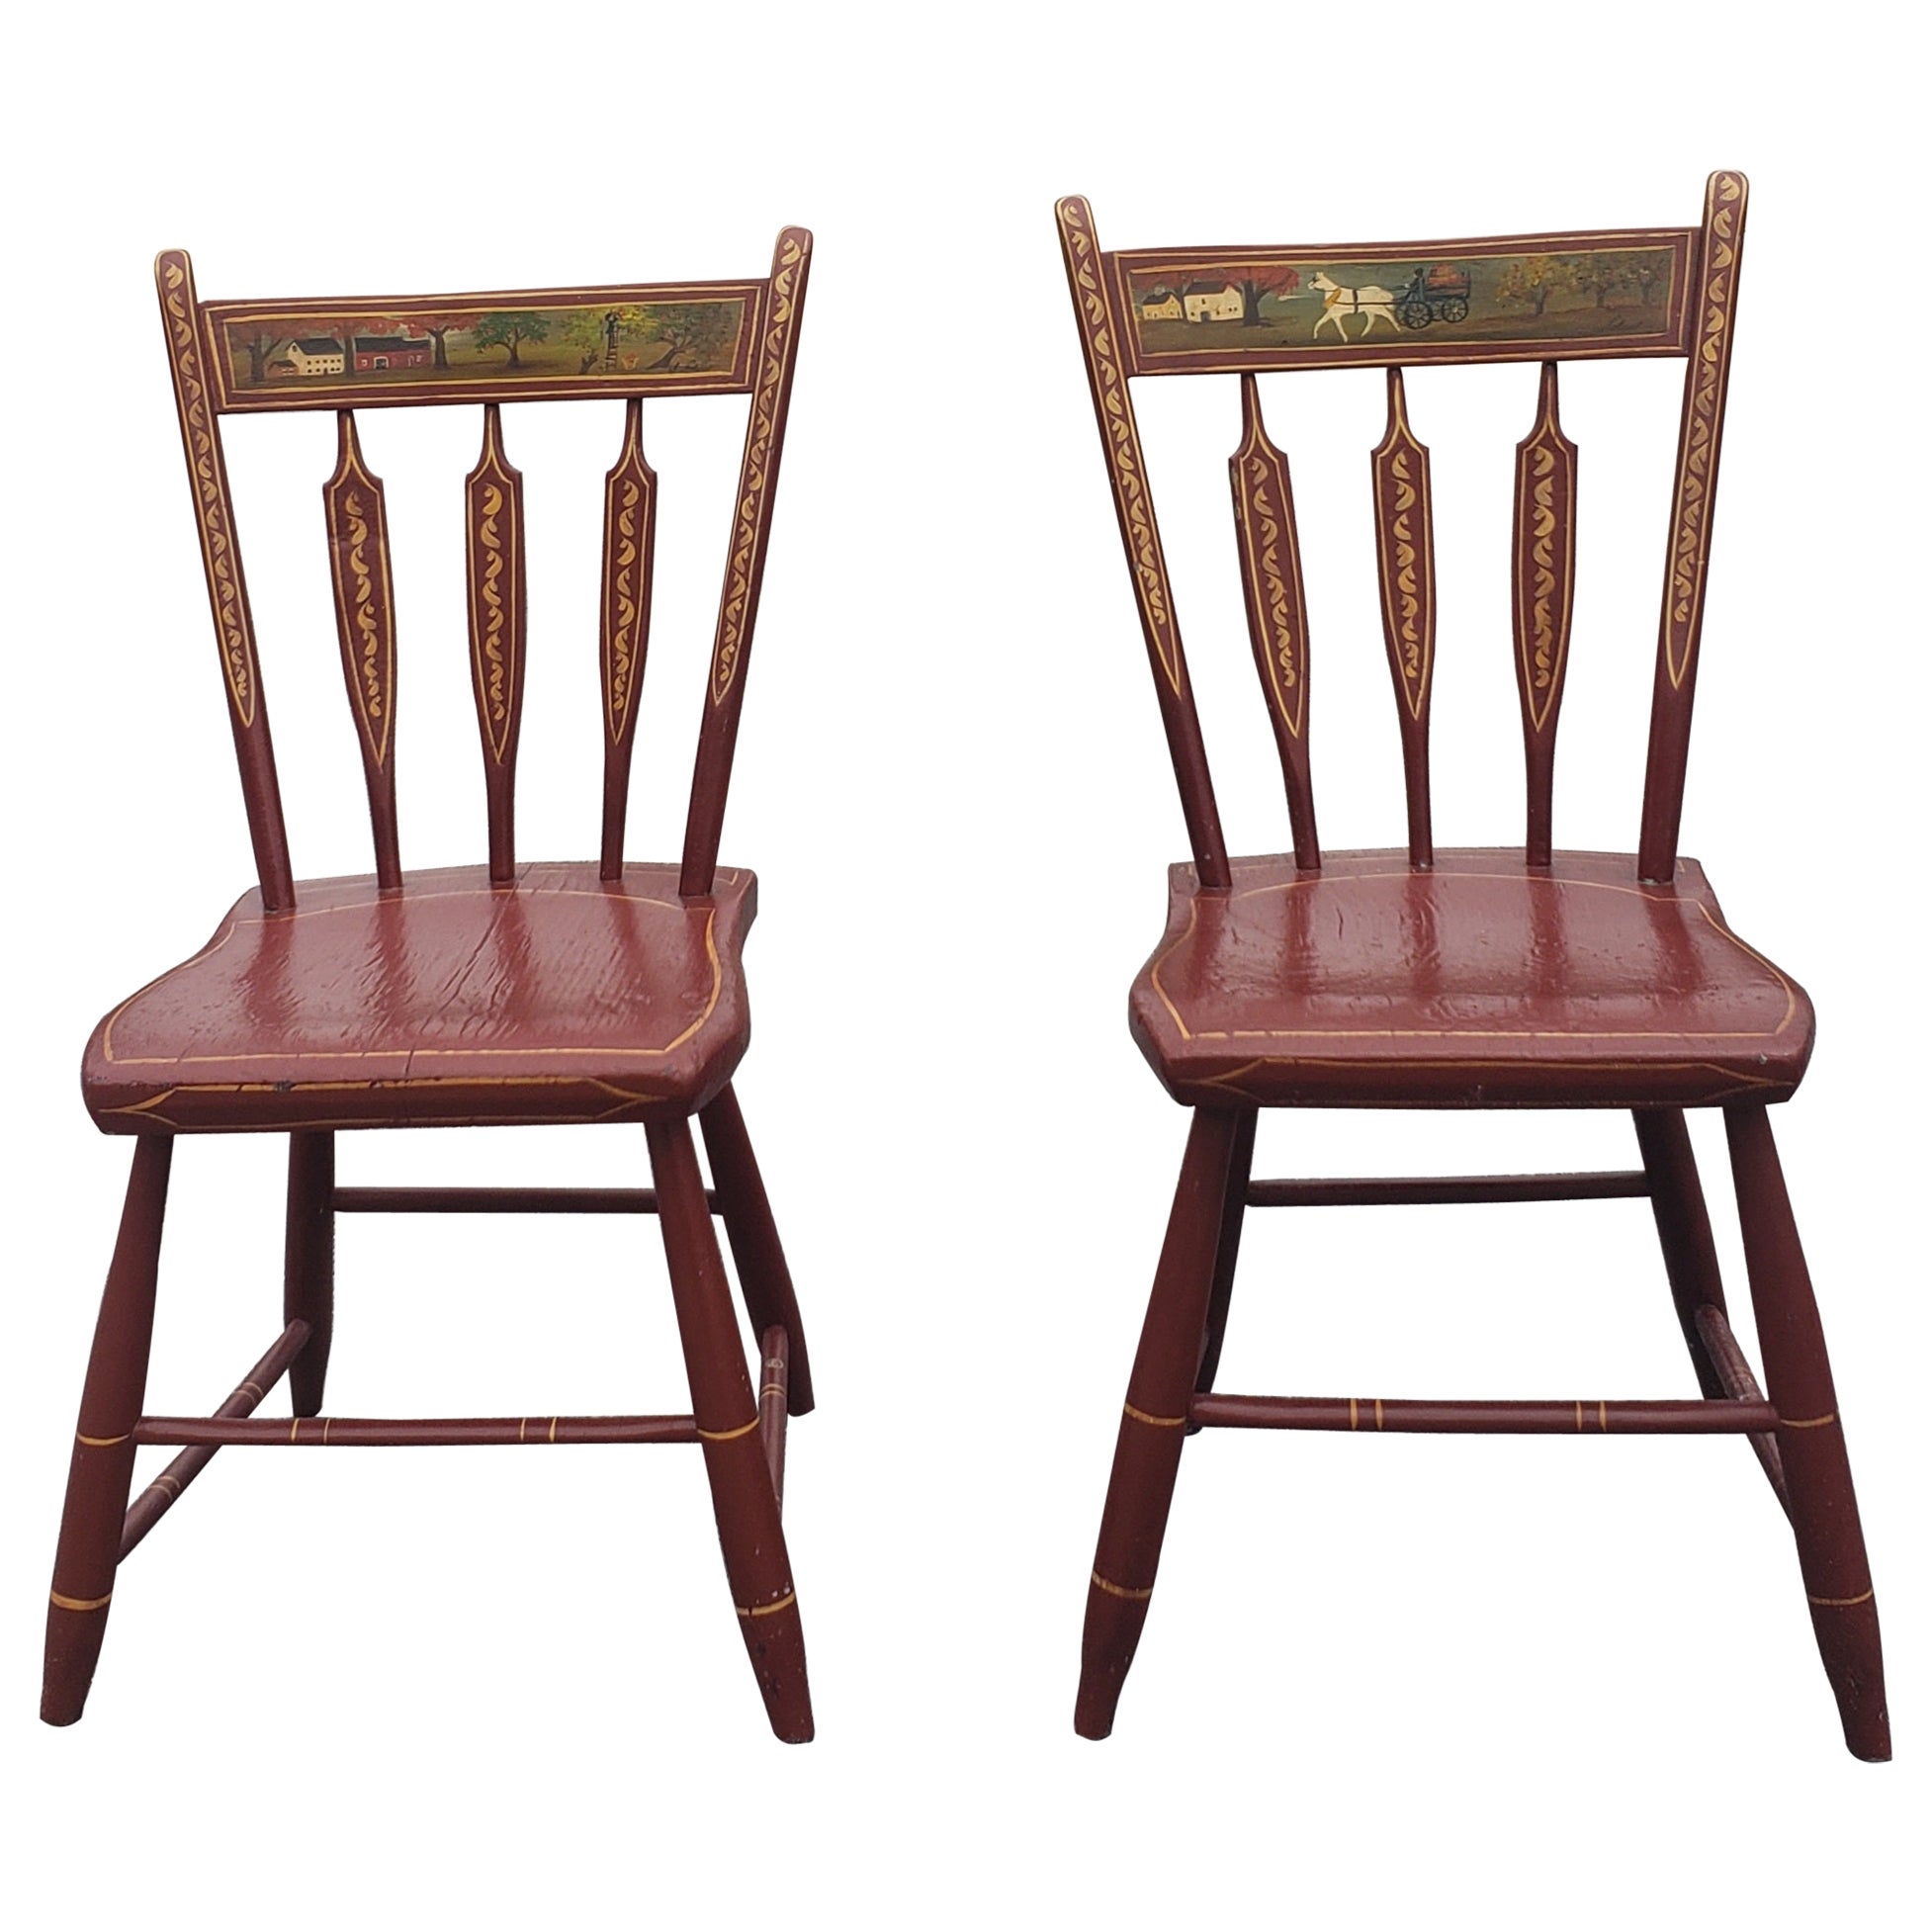 Pair of 19th Century. Signed Hand Painted and Decorated Plank Seat Side Chairs